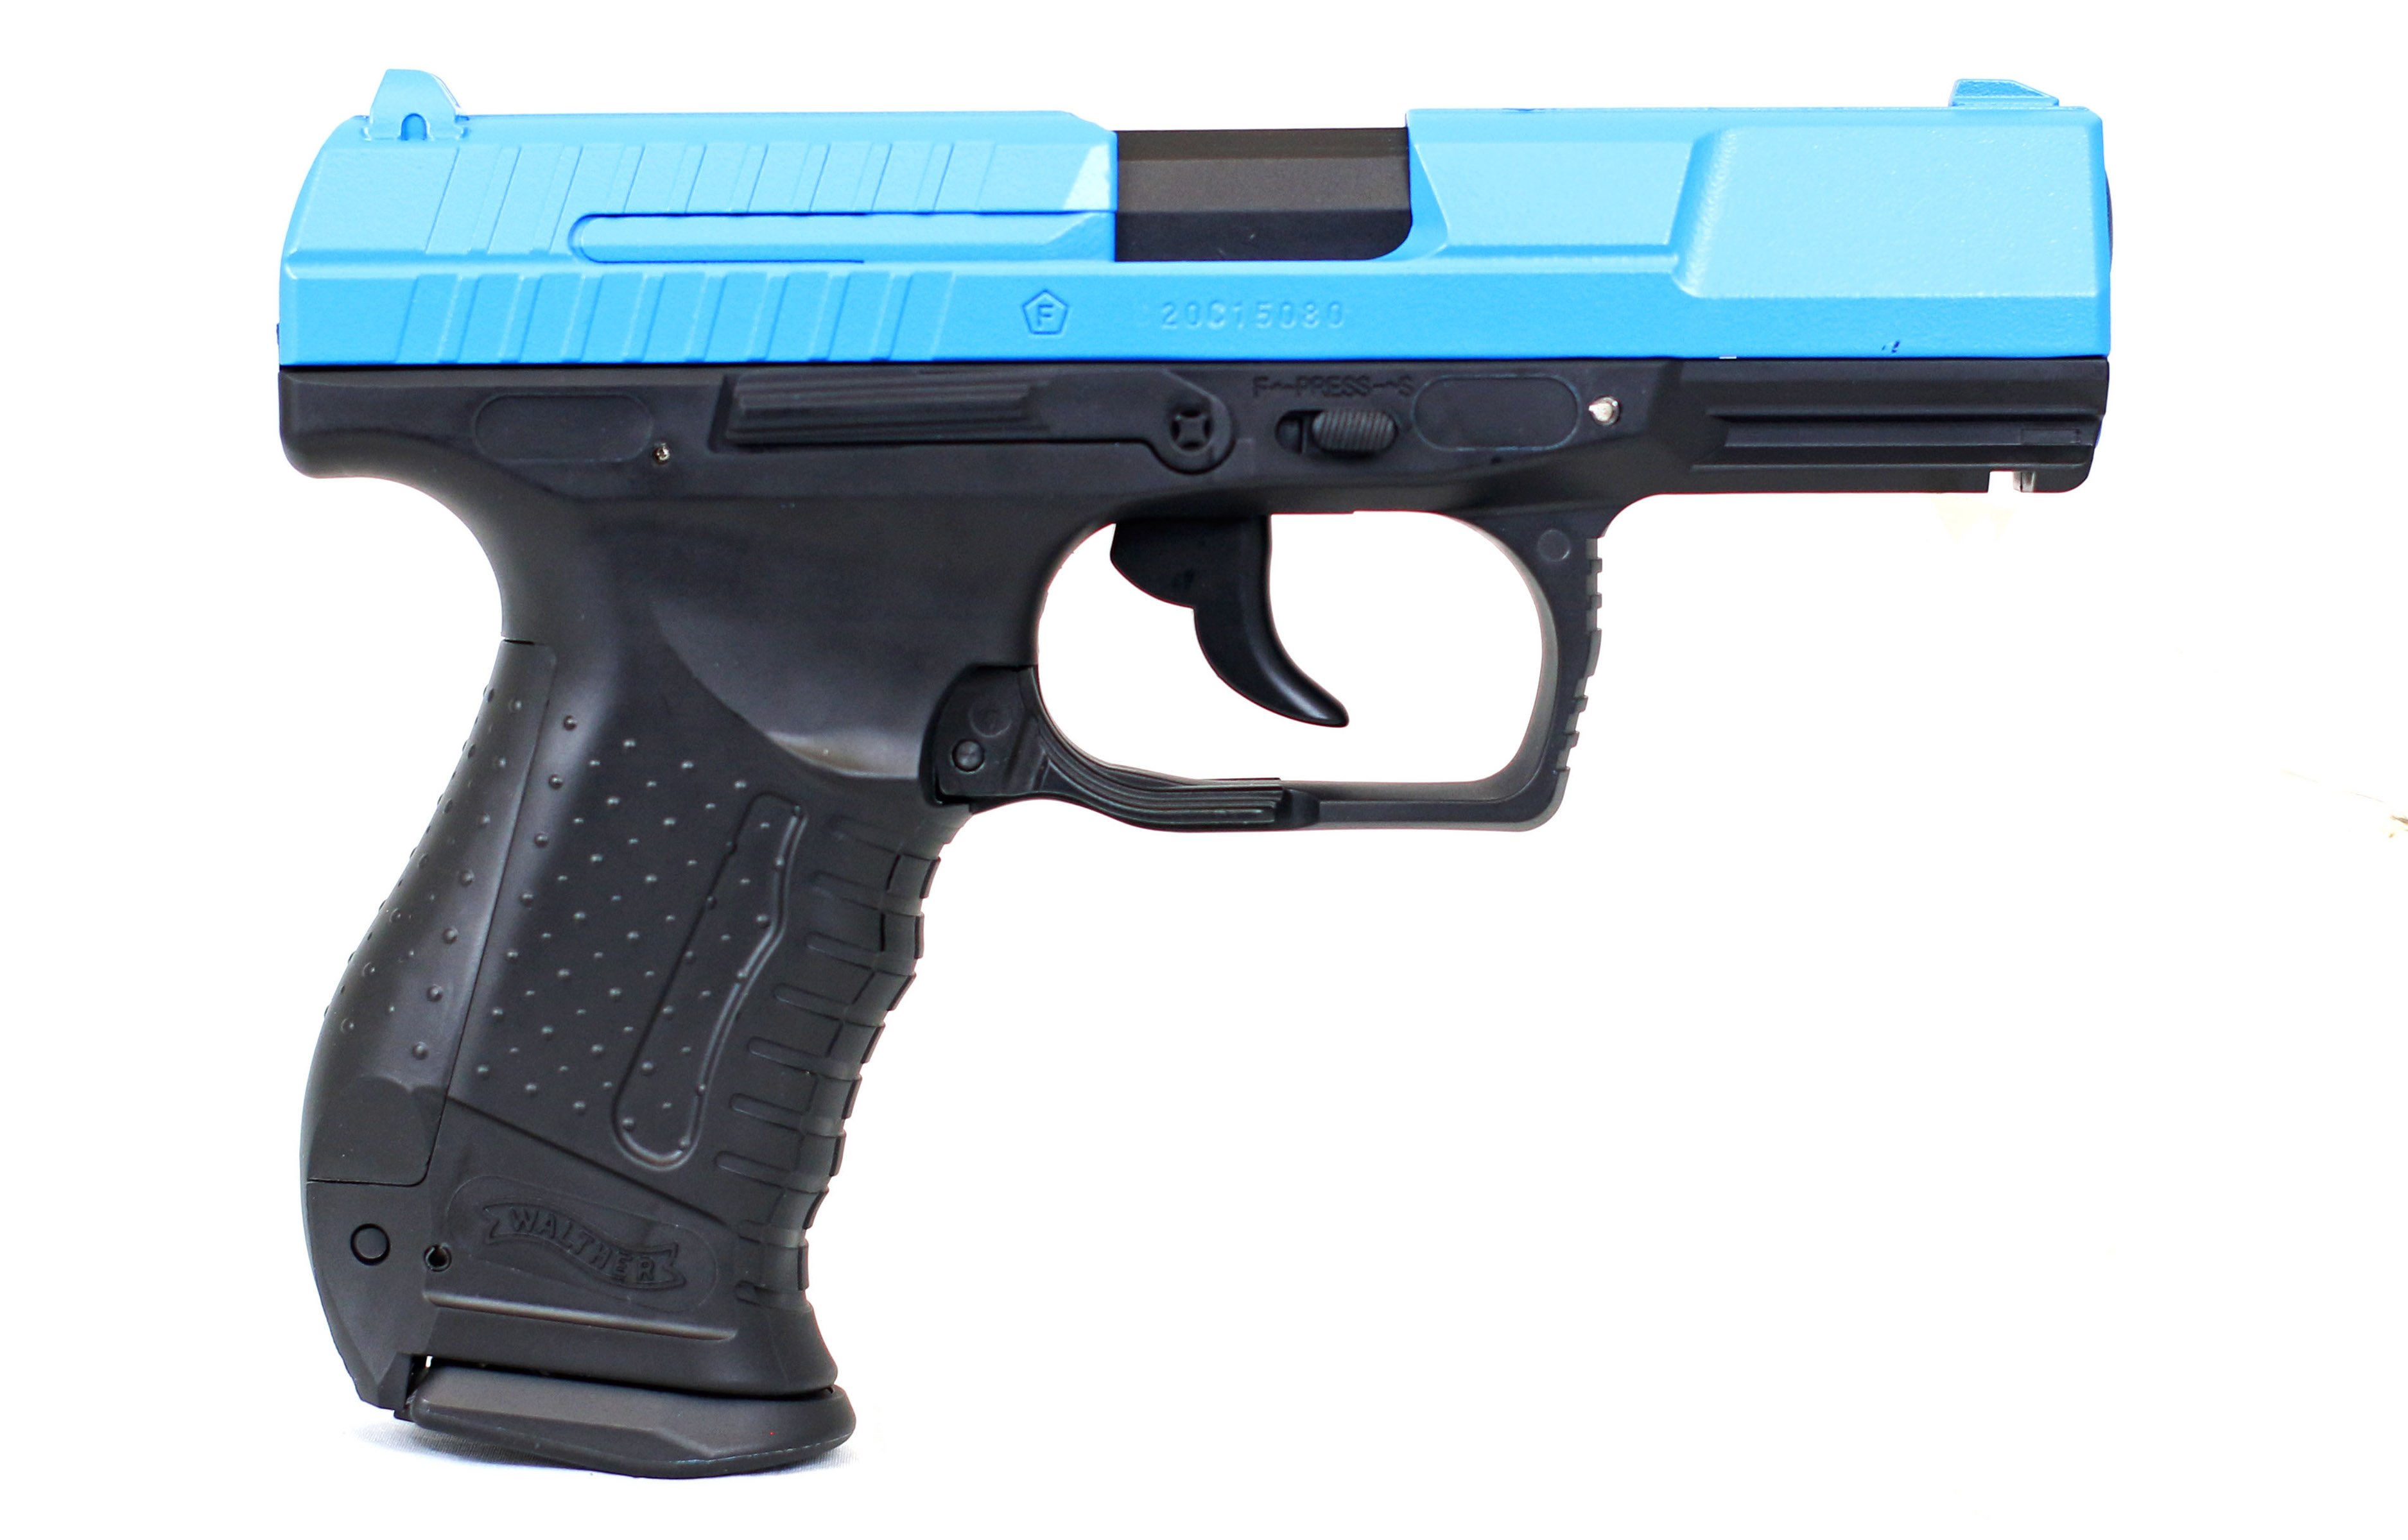 Umarex Walther P99 airsoft bb gun painted in solid two tone blue